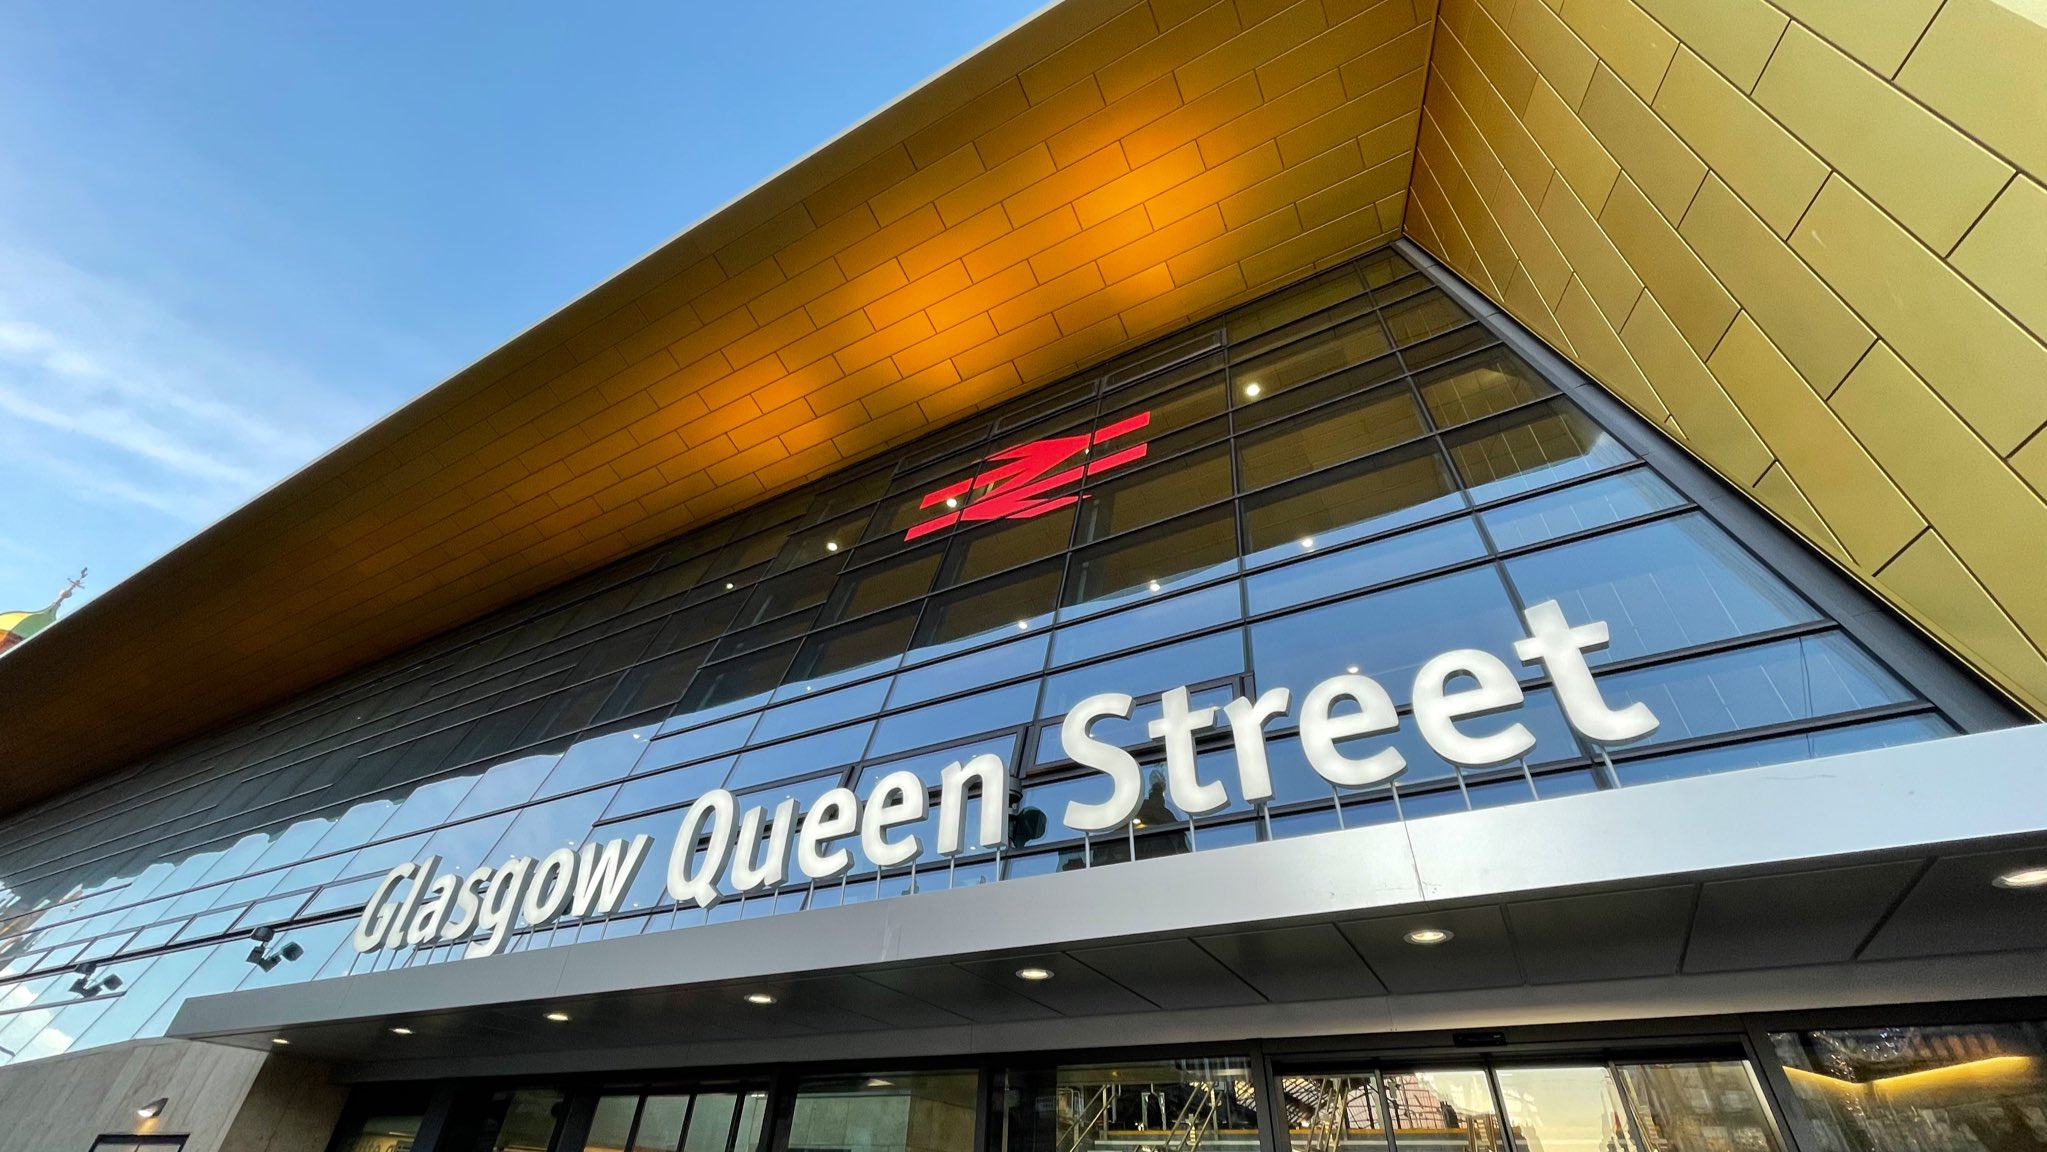 Queen Street scoops Station Excellence Award